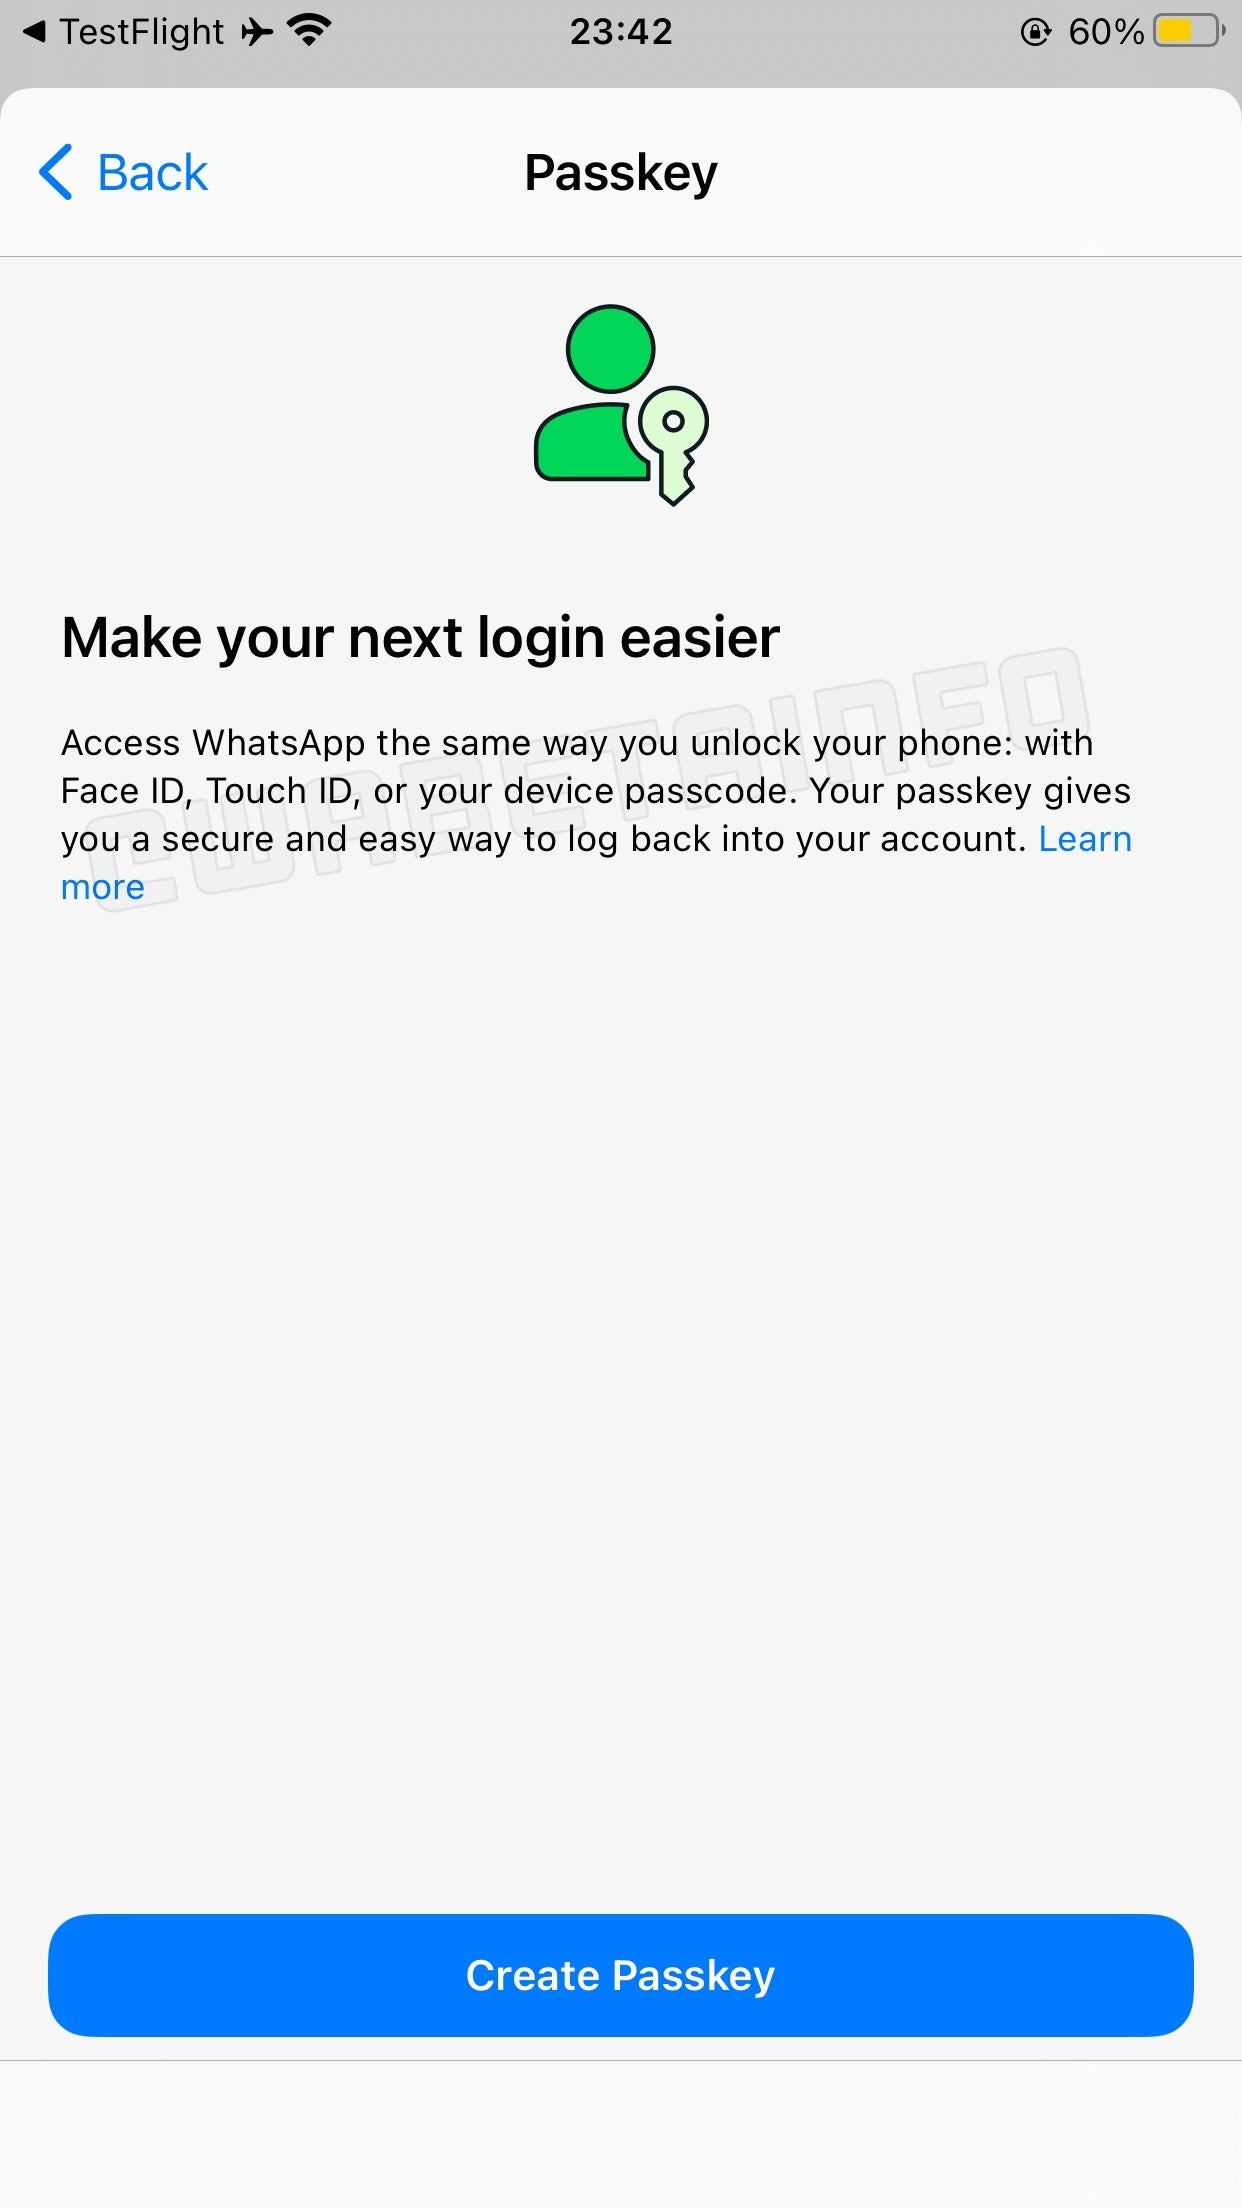 Image Credit–WABetaInfo - WhatsApp might finally introduce passkey support for iOS users